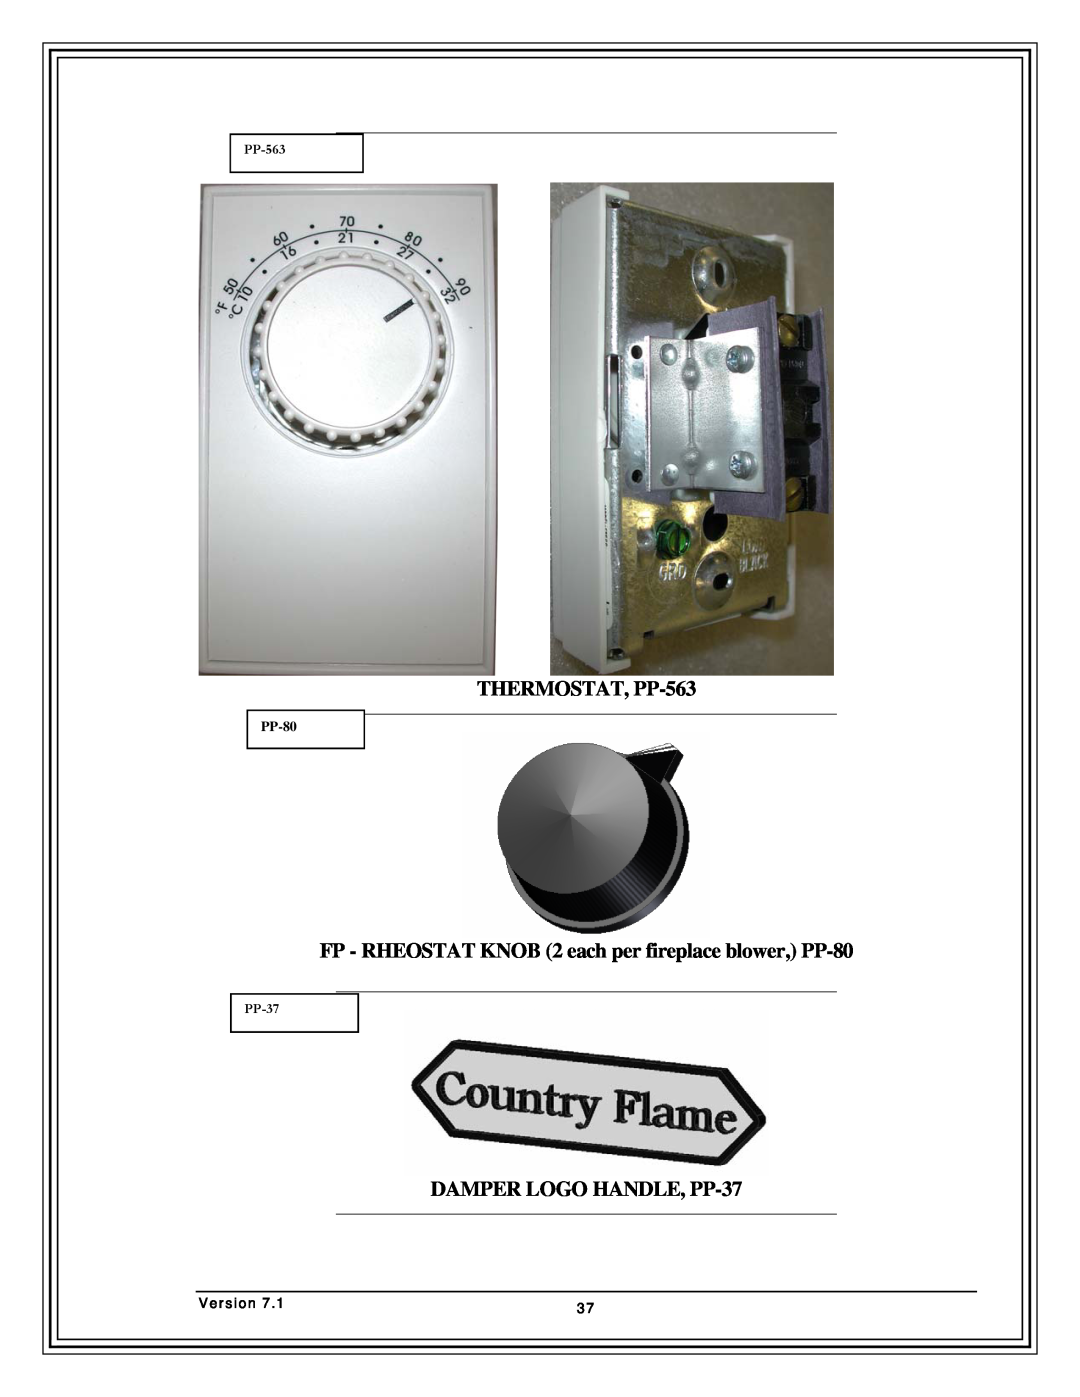 Country Flame FP42, FP37, Fireplace FP33 manual THERMOSTAT, PP-563, DAMPER LOGO HANDLE, PP-37, PP-80, Version 